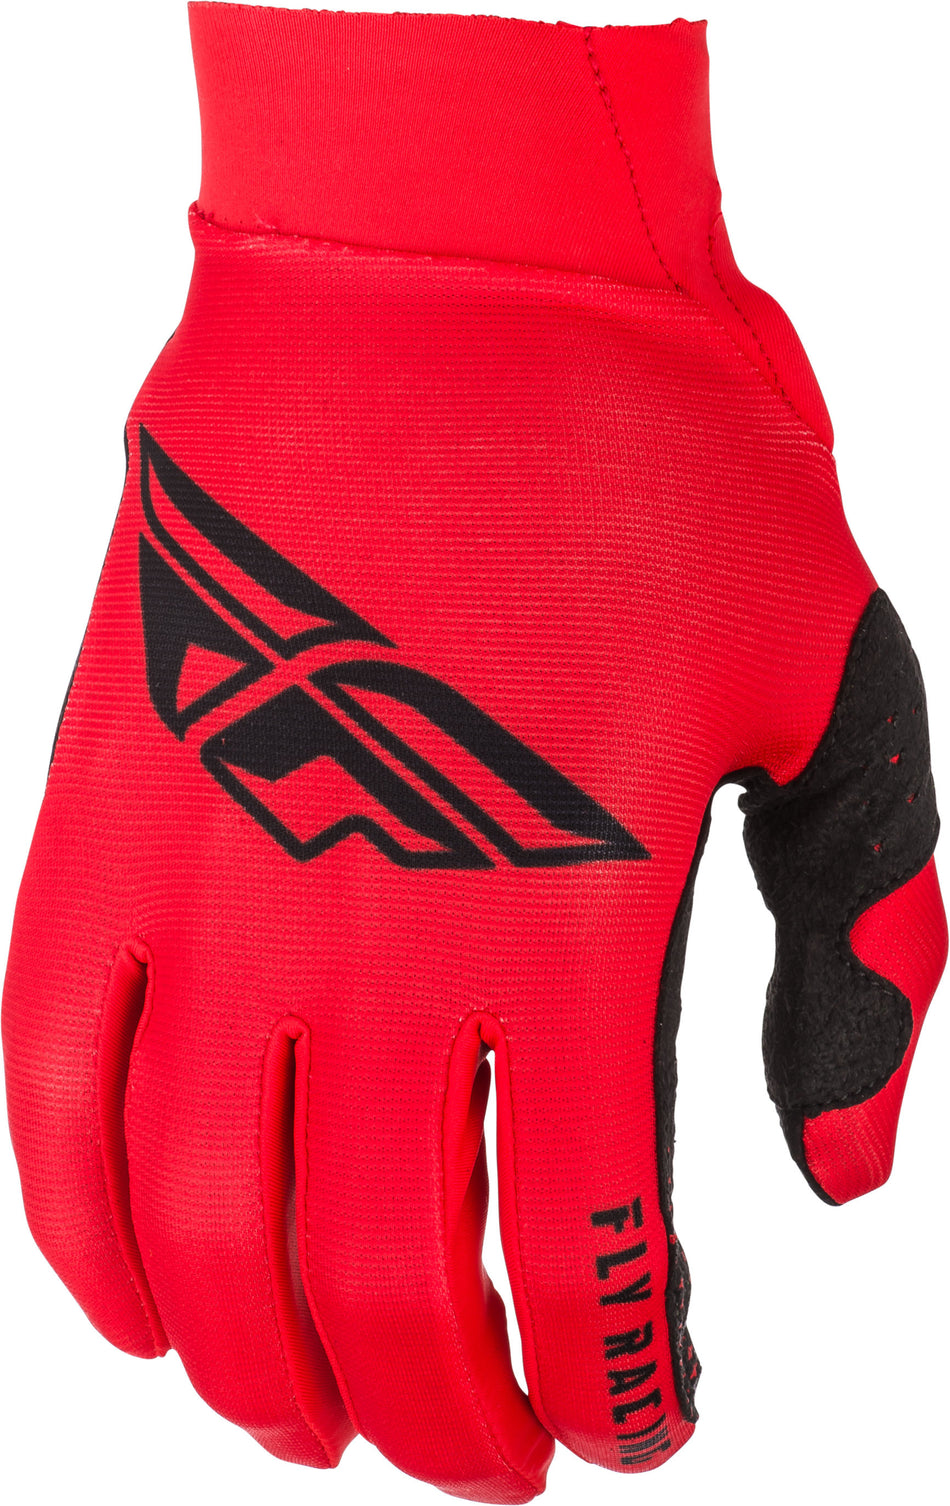 FLY RACING Pro Lite Gloves Red/Black Sz 13 372-81213